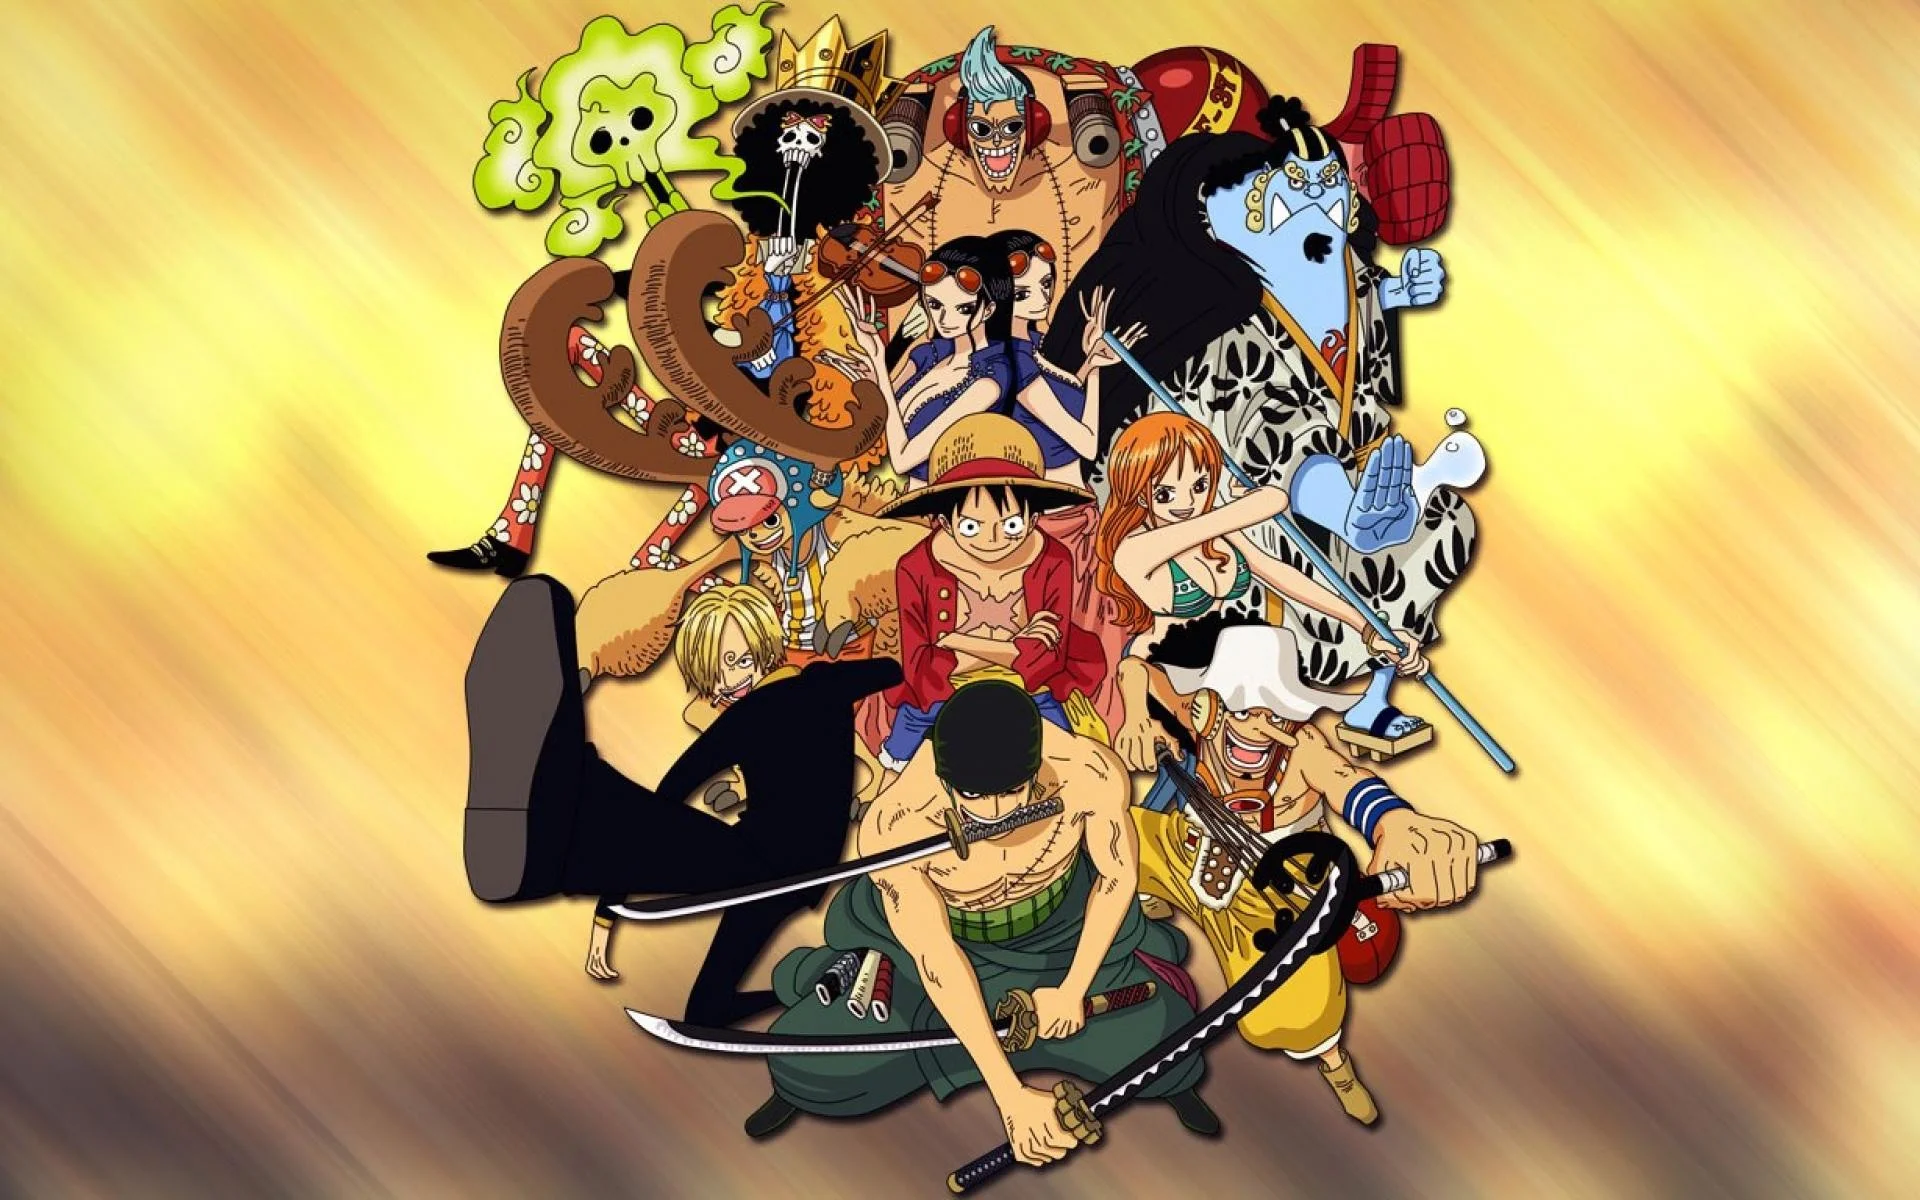 Wallpaper ID 452999  Anime One Piece Phone Wallpaper Nami One Piece  720x1280 free download